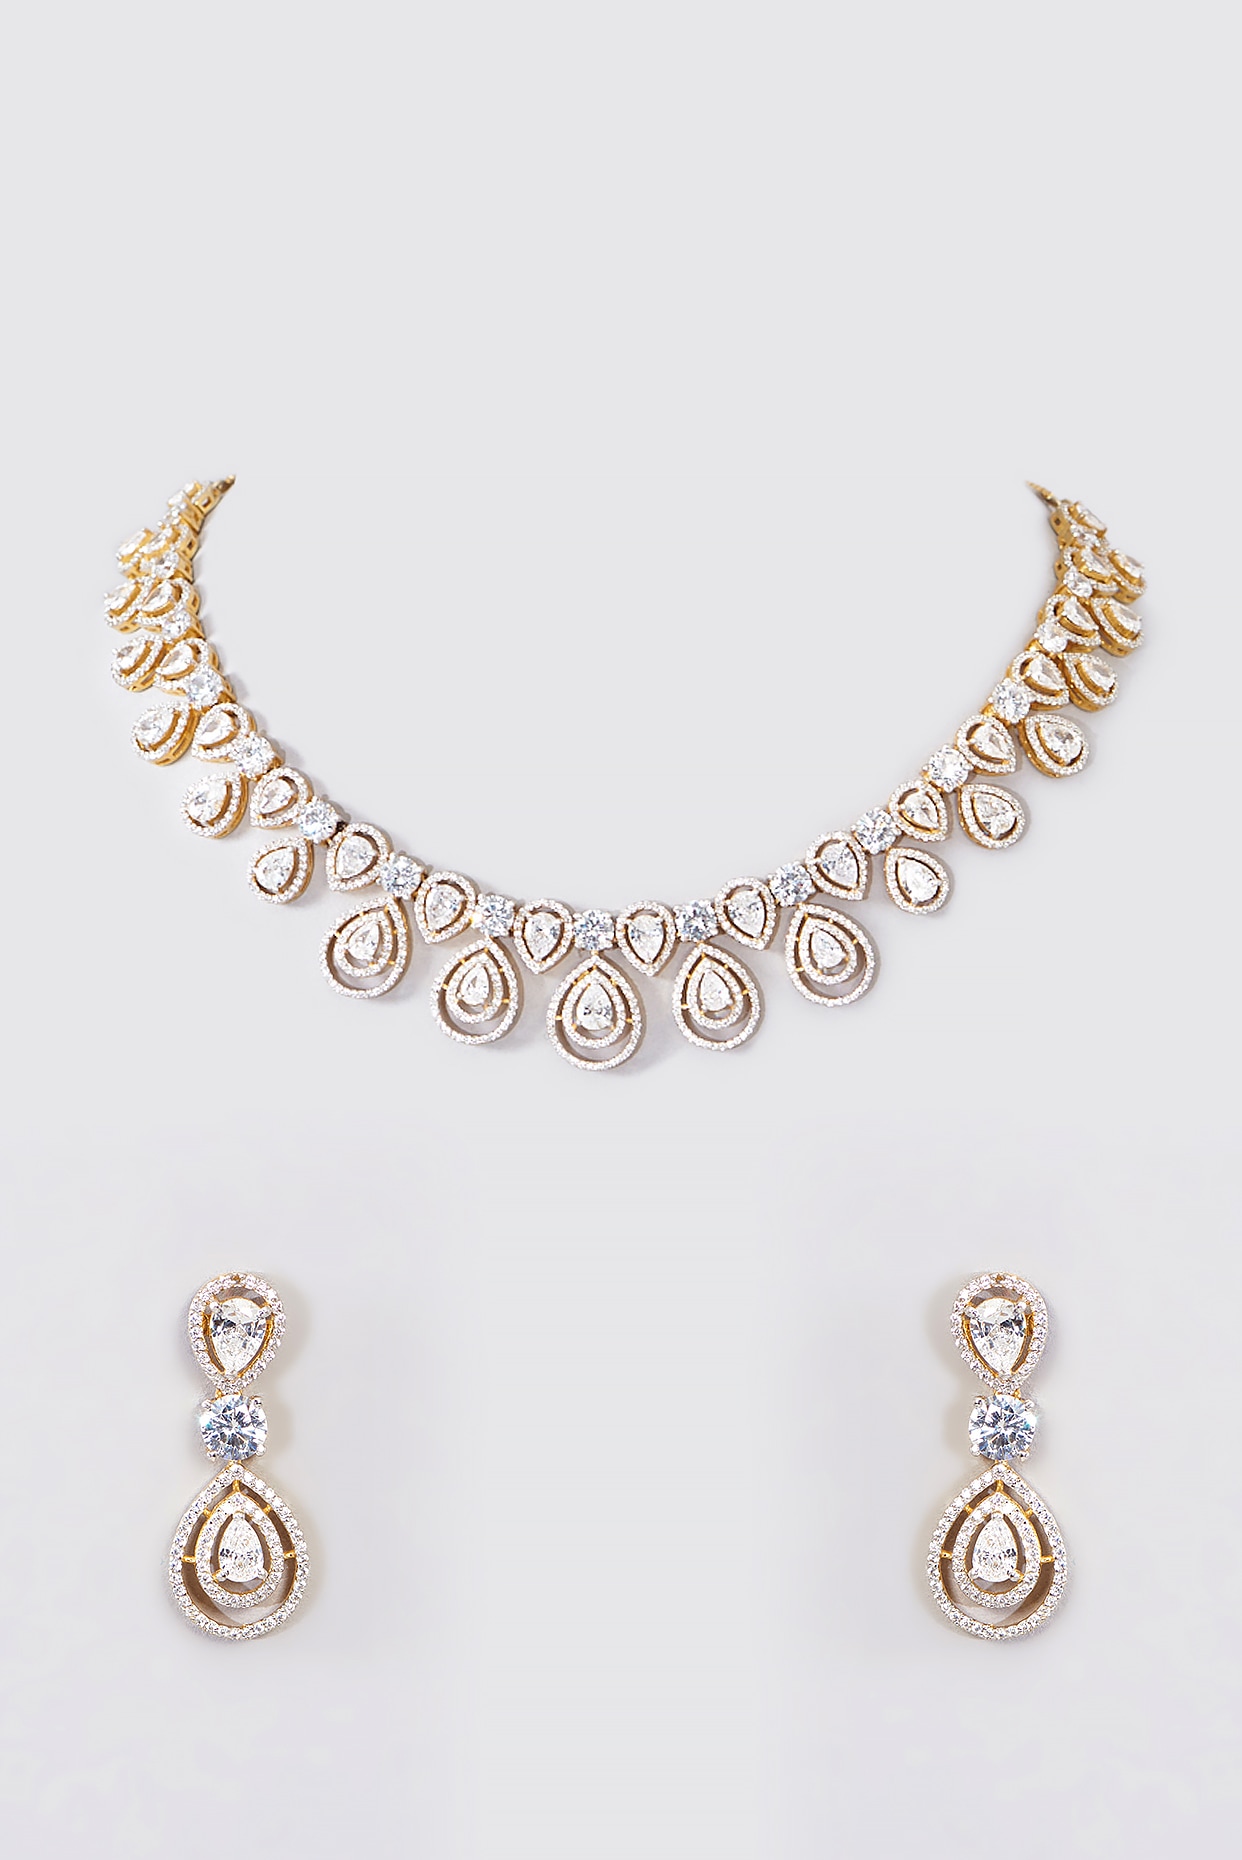 Regal Cubic Zirconia Necklace and Earrings Wedding Jewelry Set | Little  Luxuries Designs